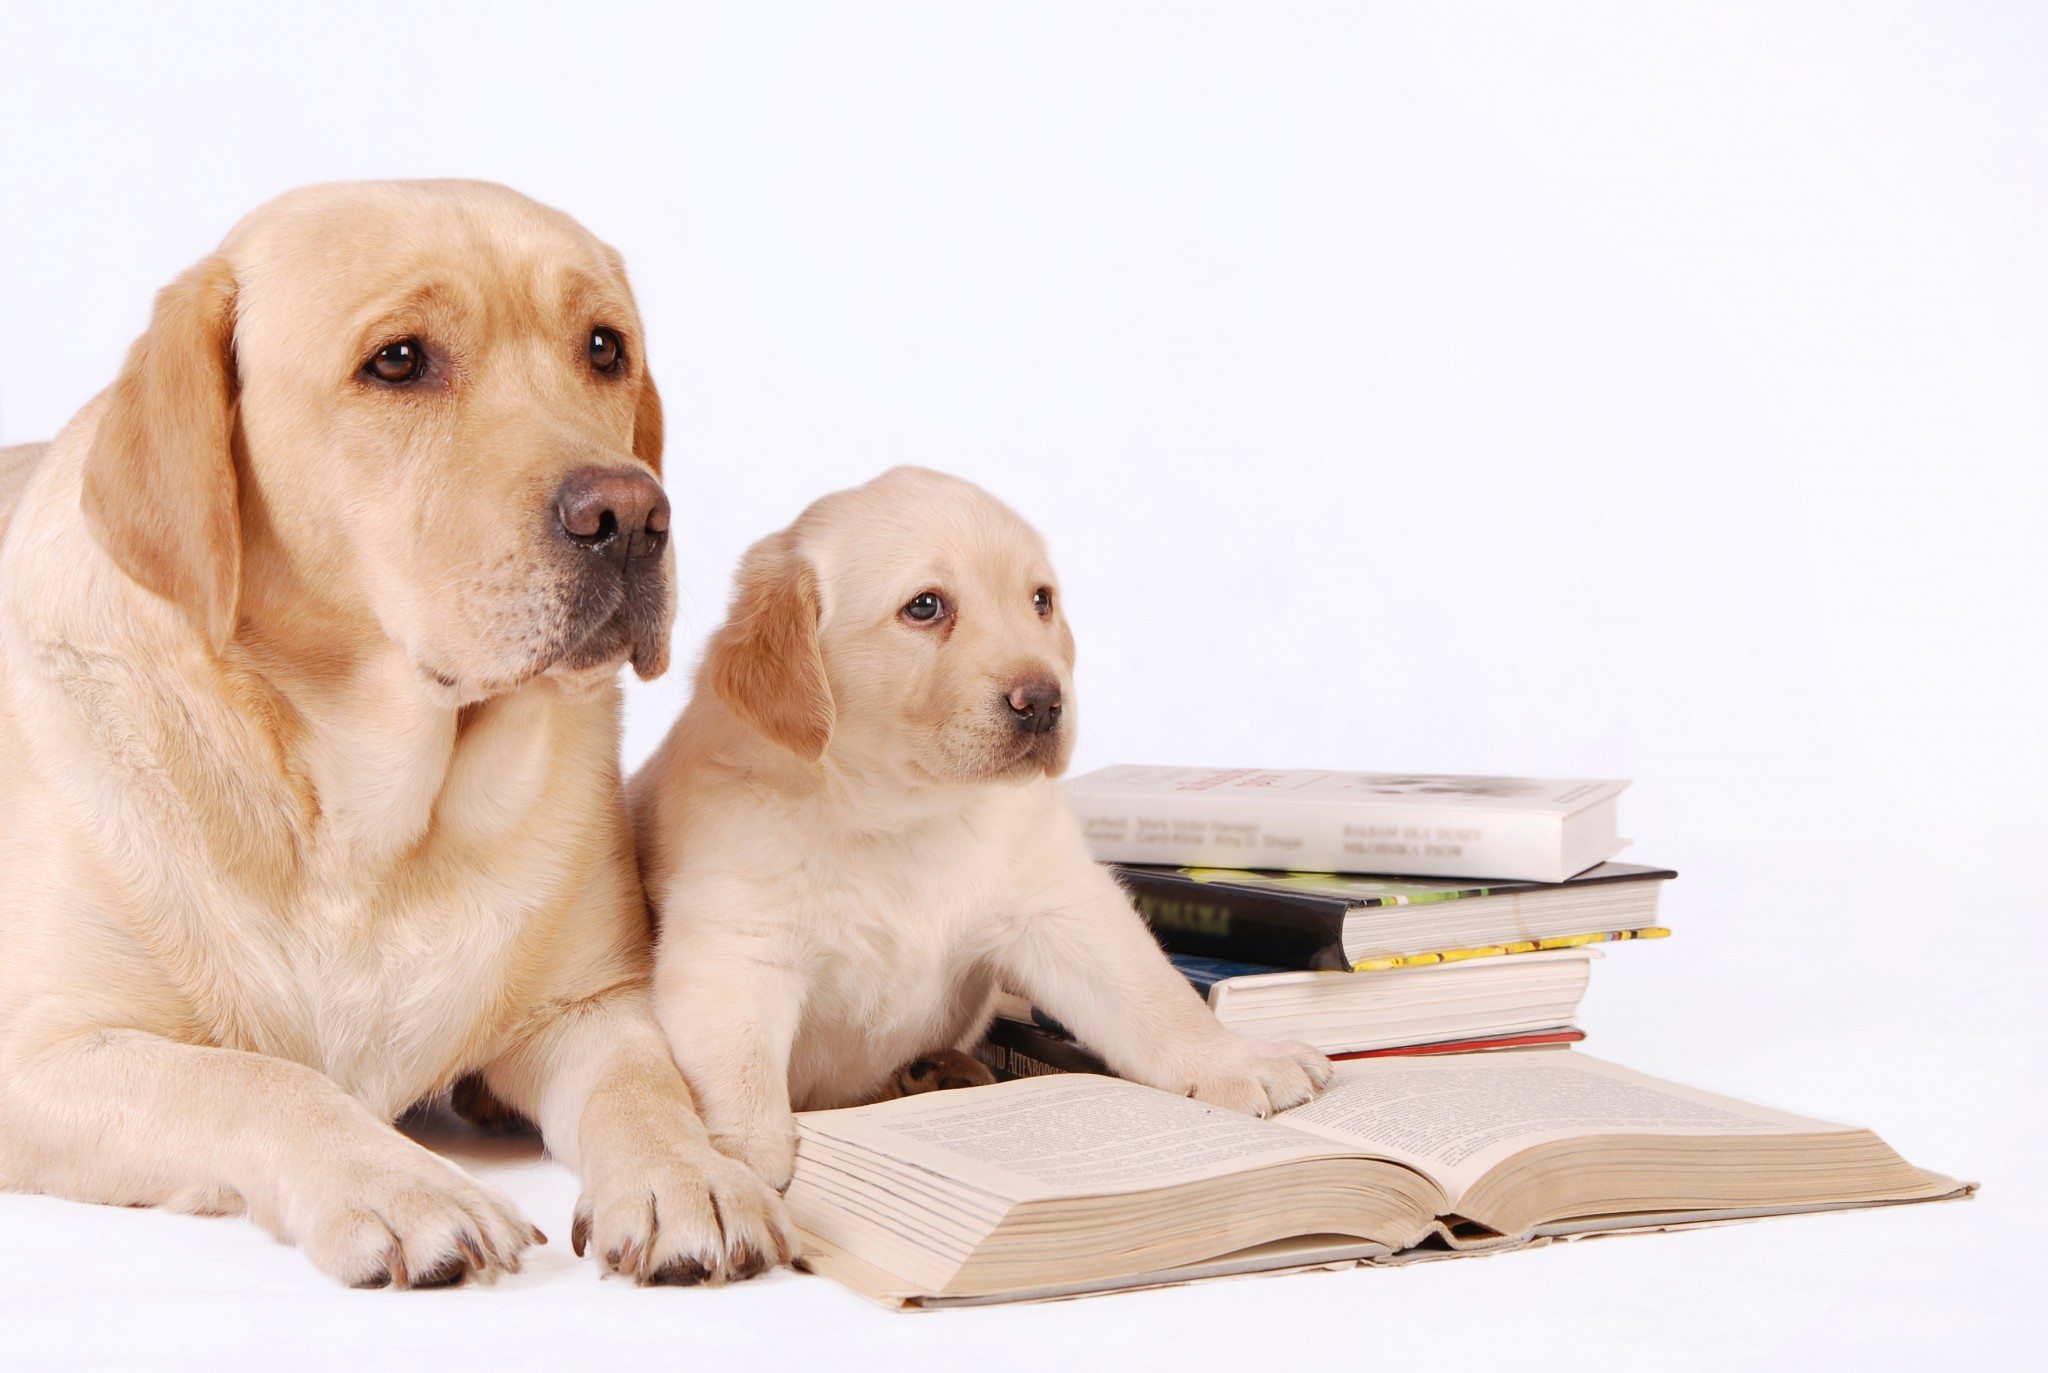 Labrador puppy and his mother with books